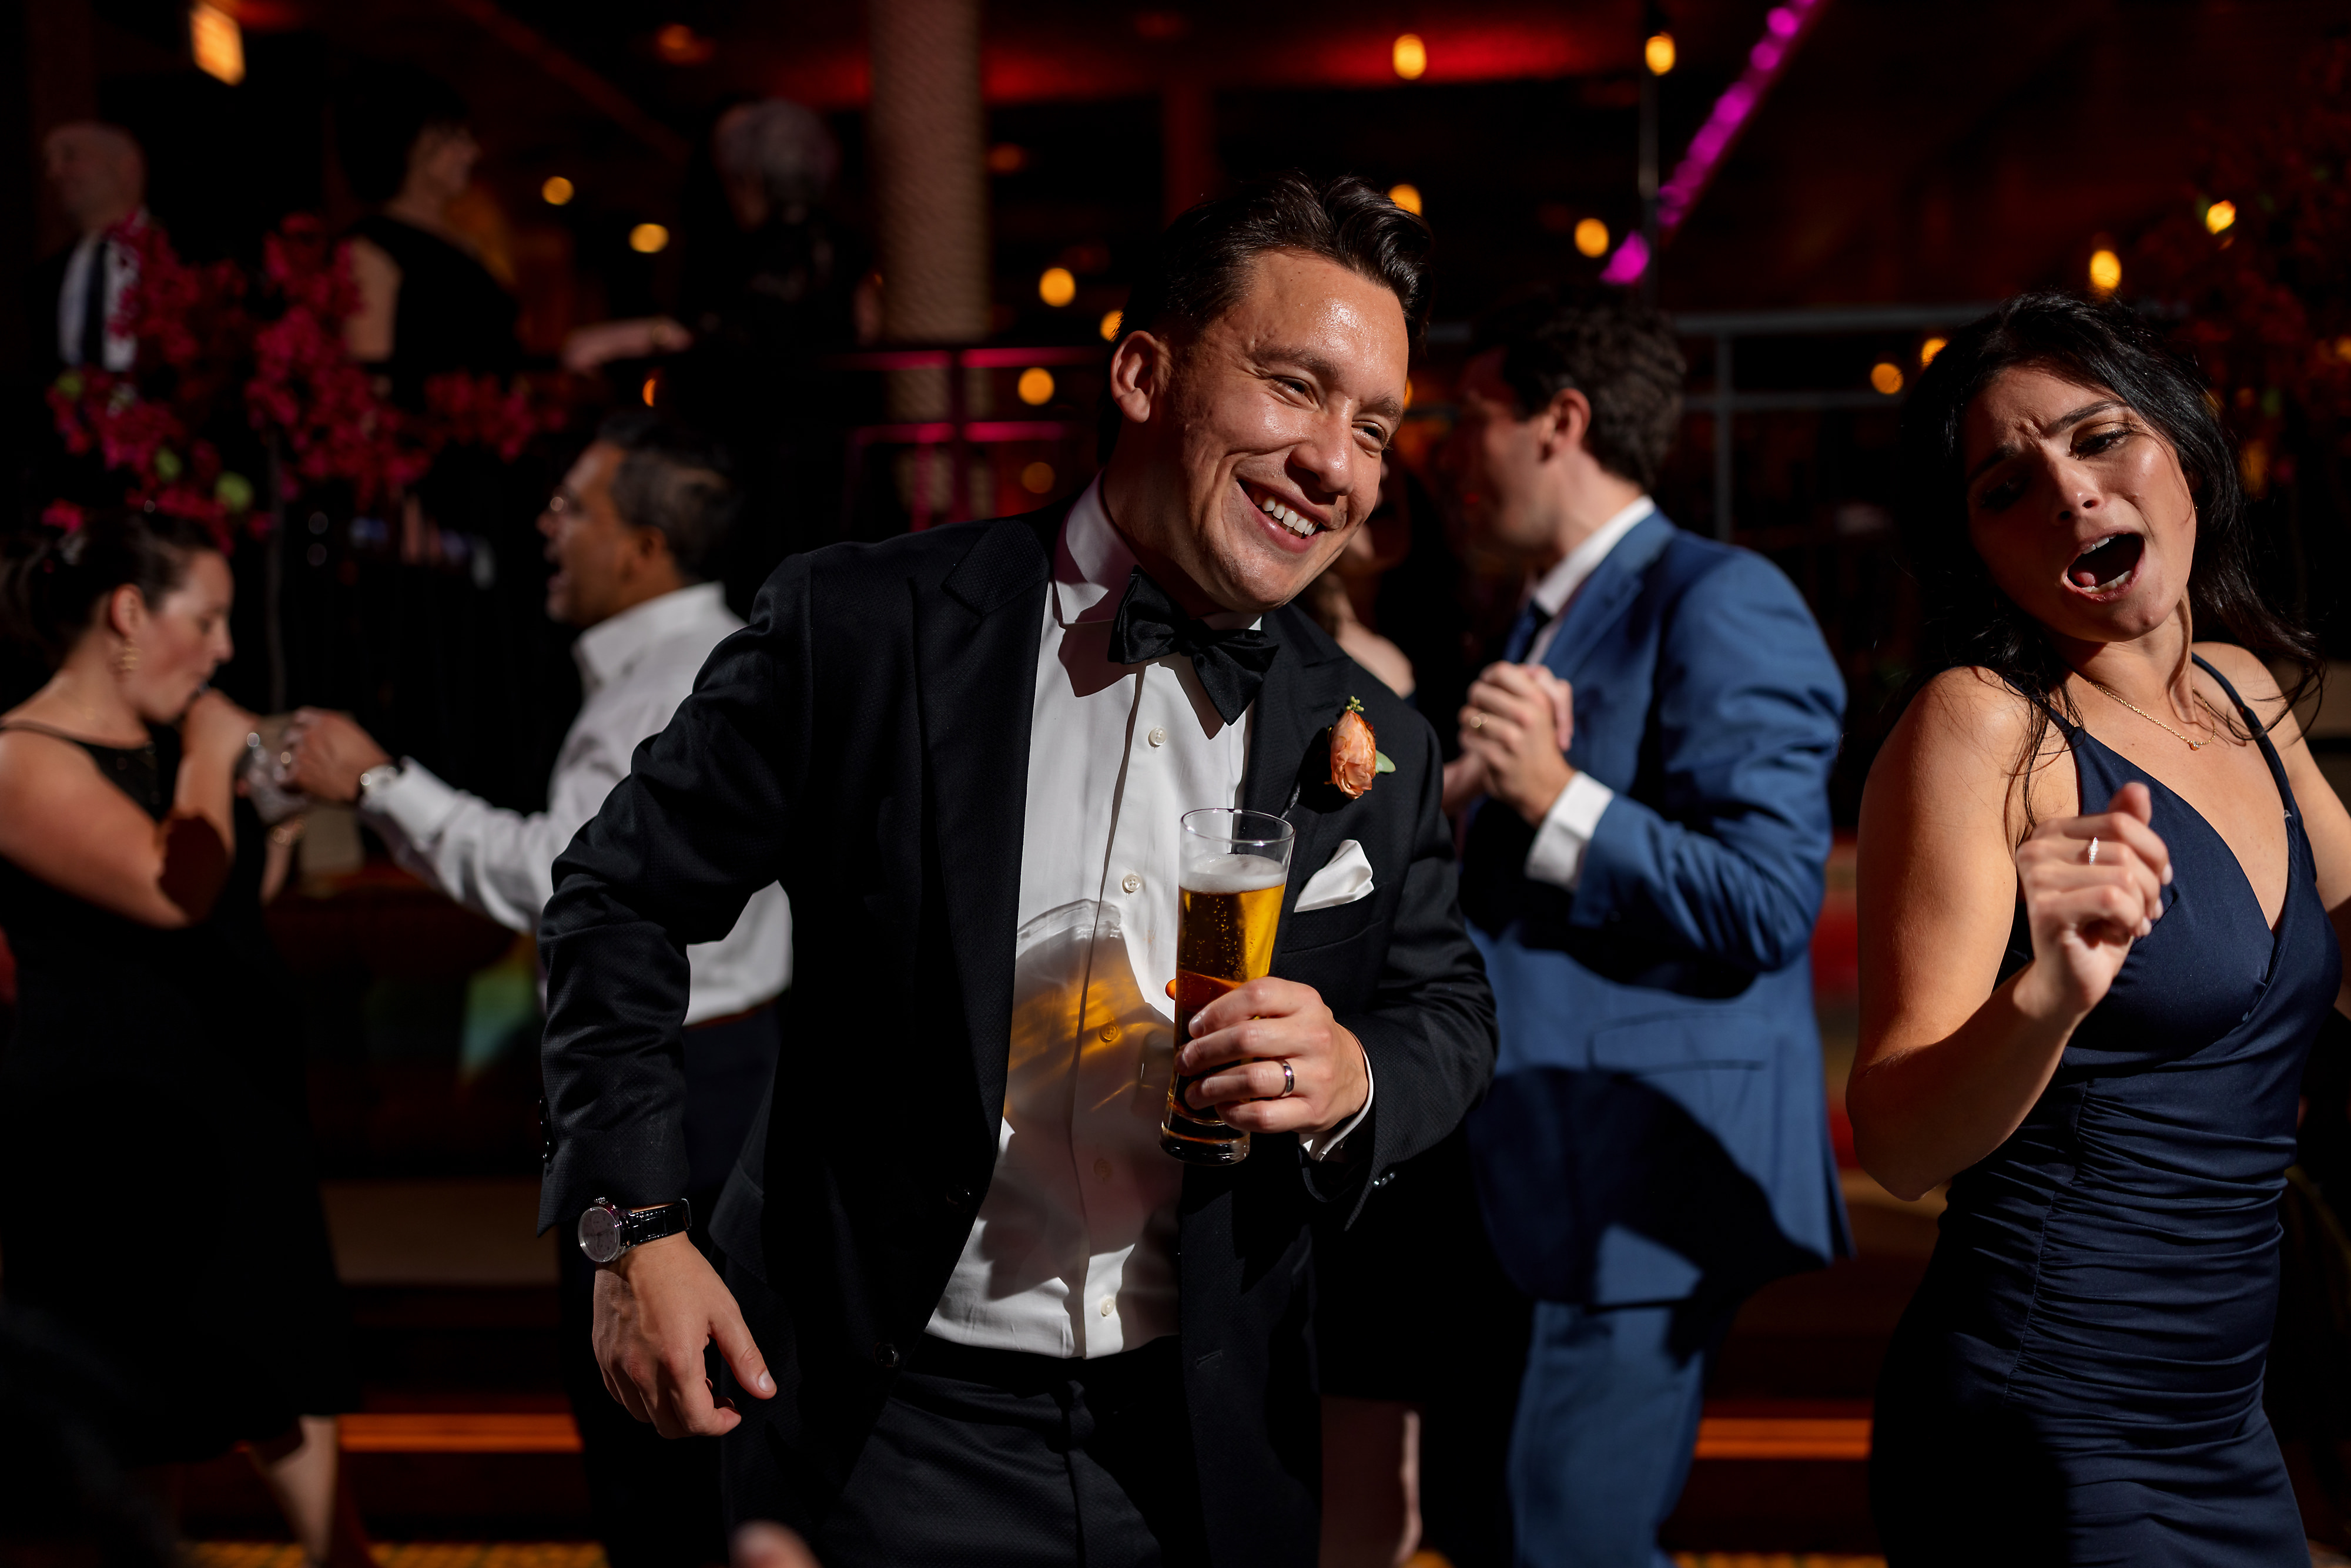 guests dance during wedding reception at Tabu Restaurant in Chicago's West Loop